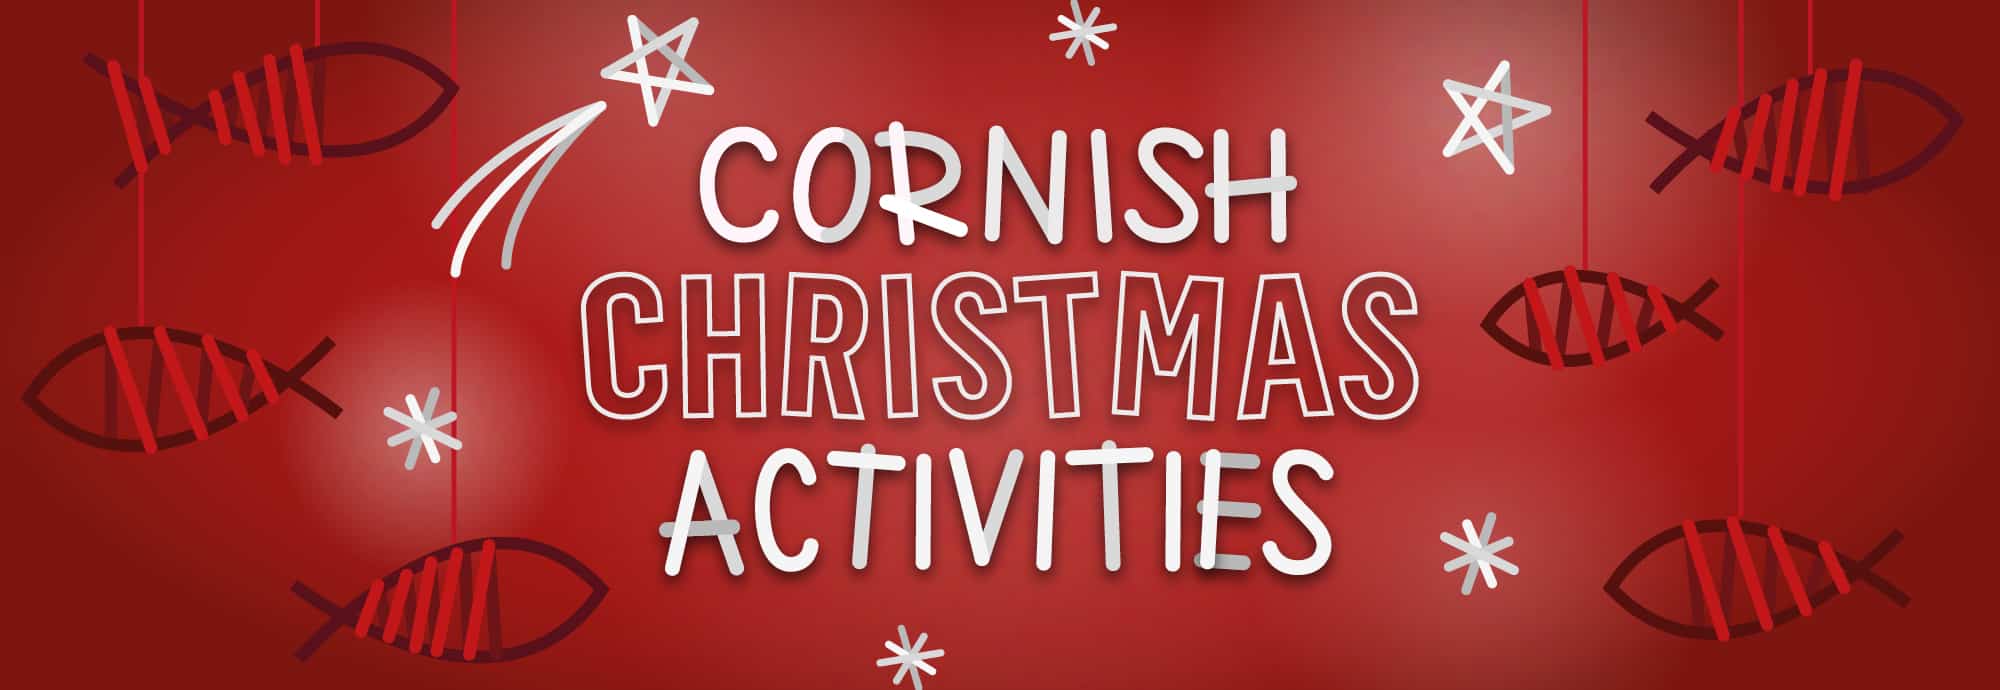 A red and white graphic with the words 'Cornish Christmas Activities'. There are festive illustrations and willow fish tree decorations in the background.